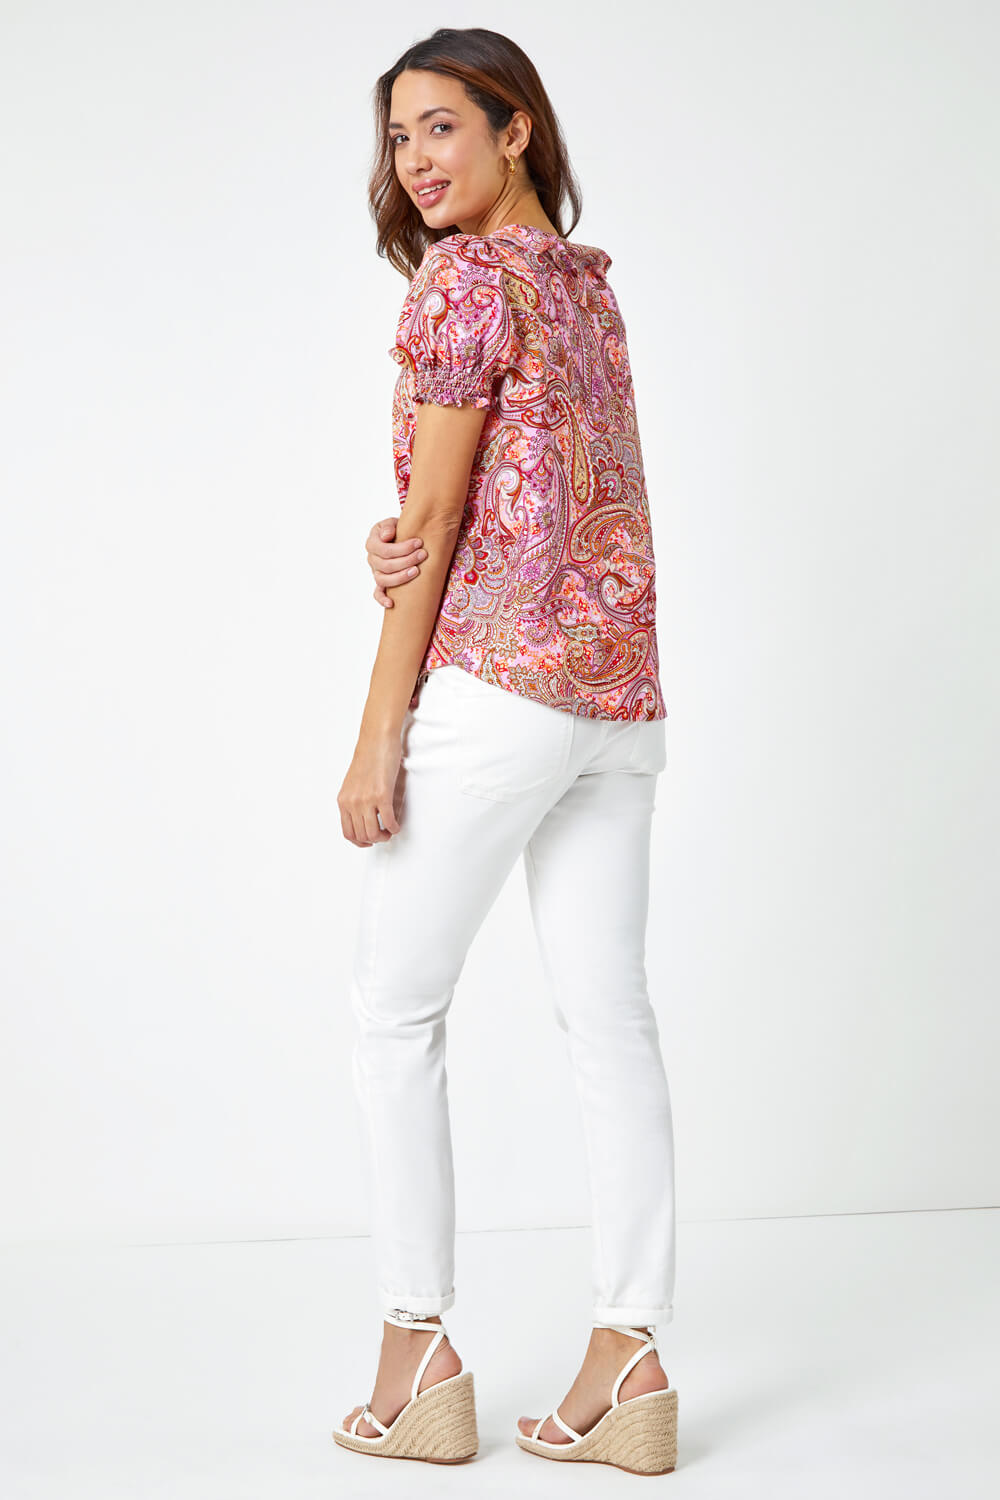 PINK Paisley Print Ruffle Front Top, Image 3 of 5